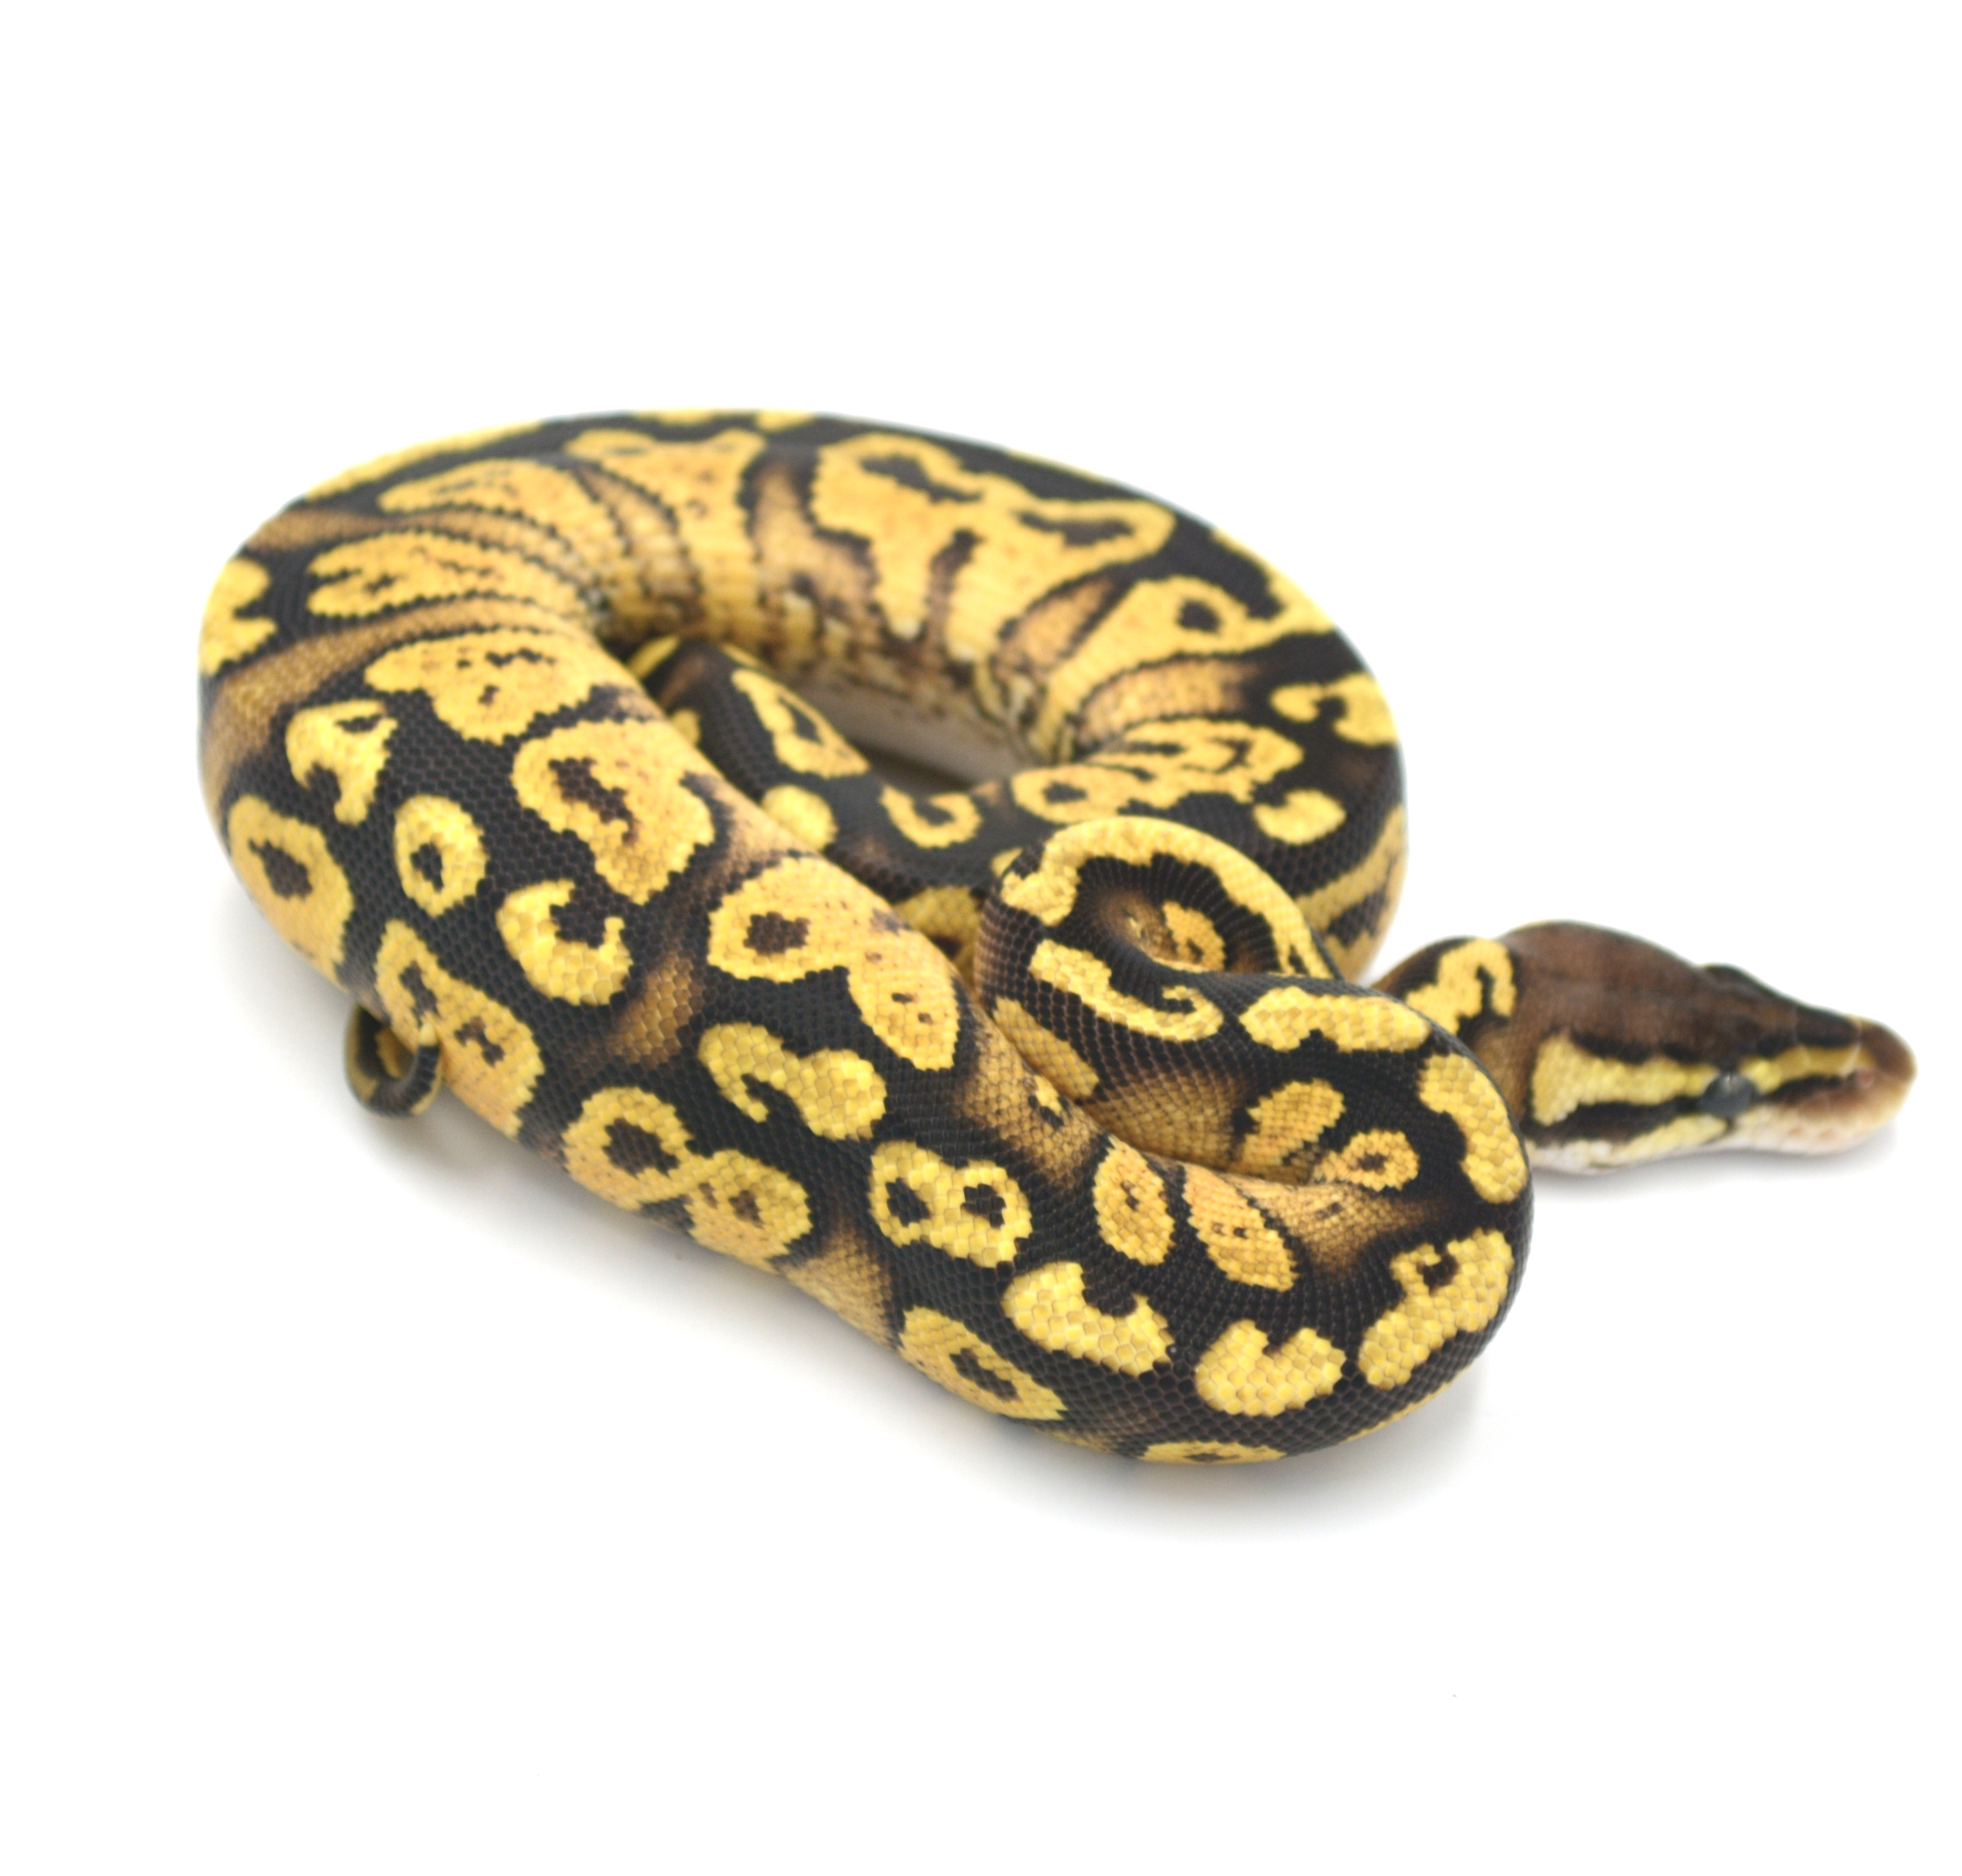 Pastel Paint Ball Python by Wreck Room Snakes